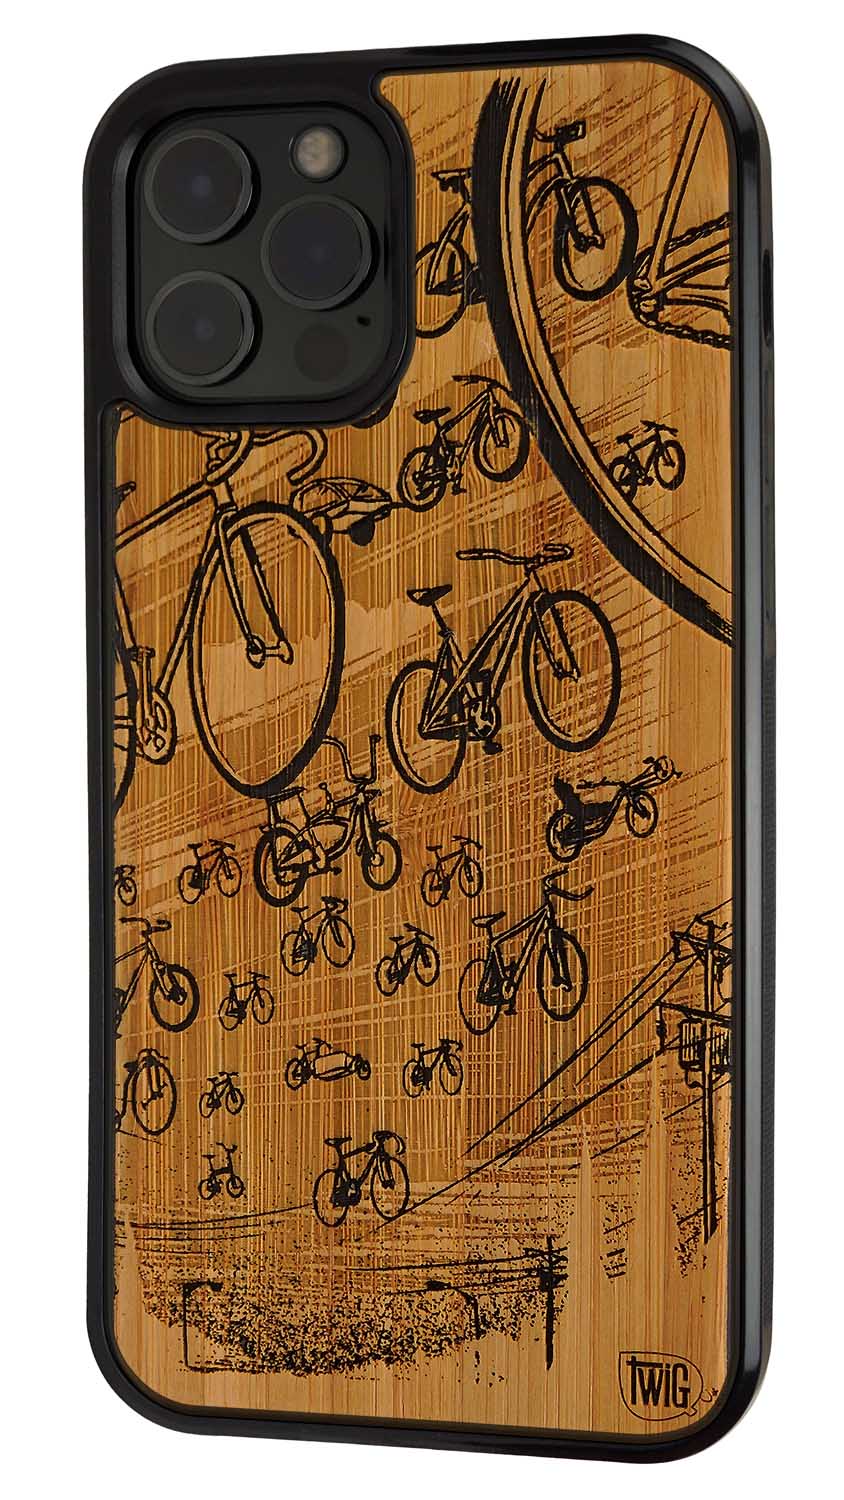 Frank in the Tempest: Pupshaw - Walnut iPhone Case, iPhone Case - Twig Case Co.